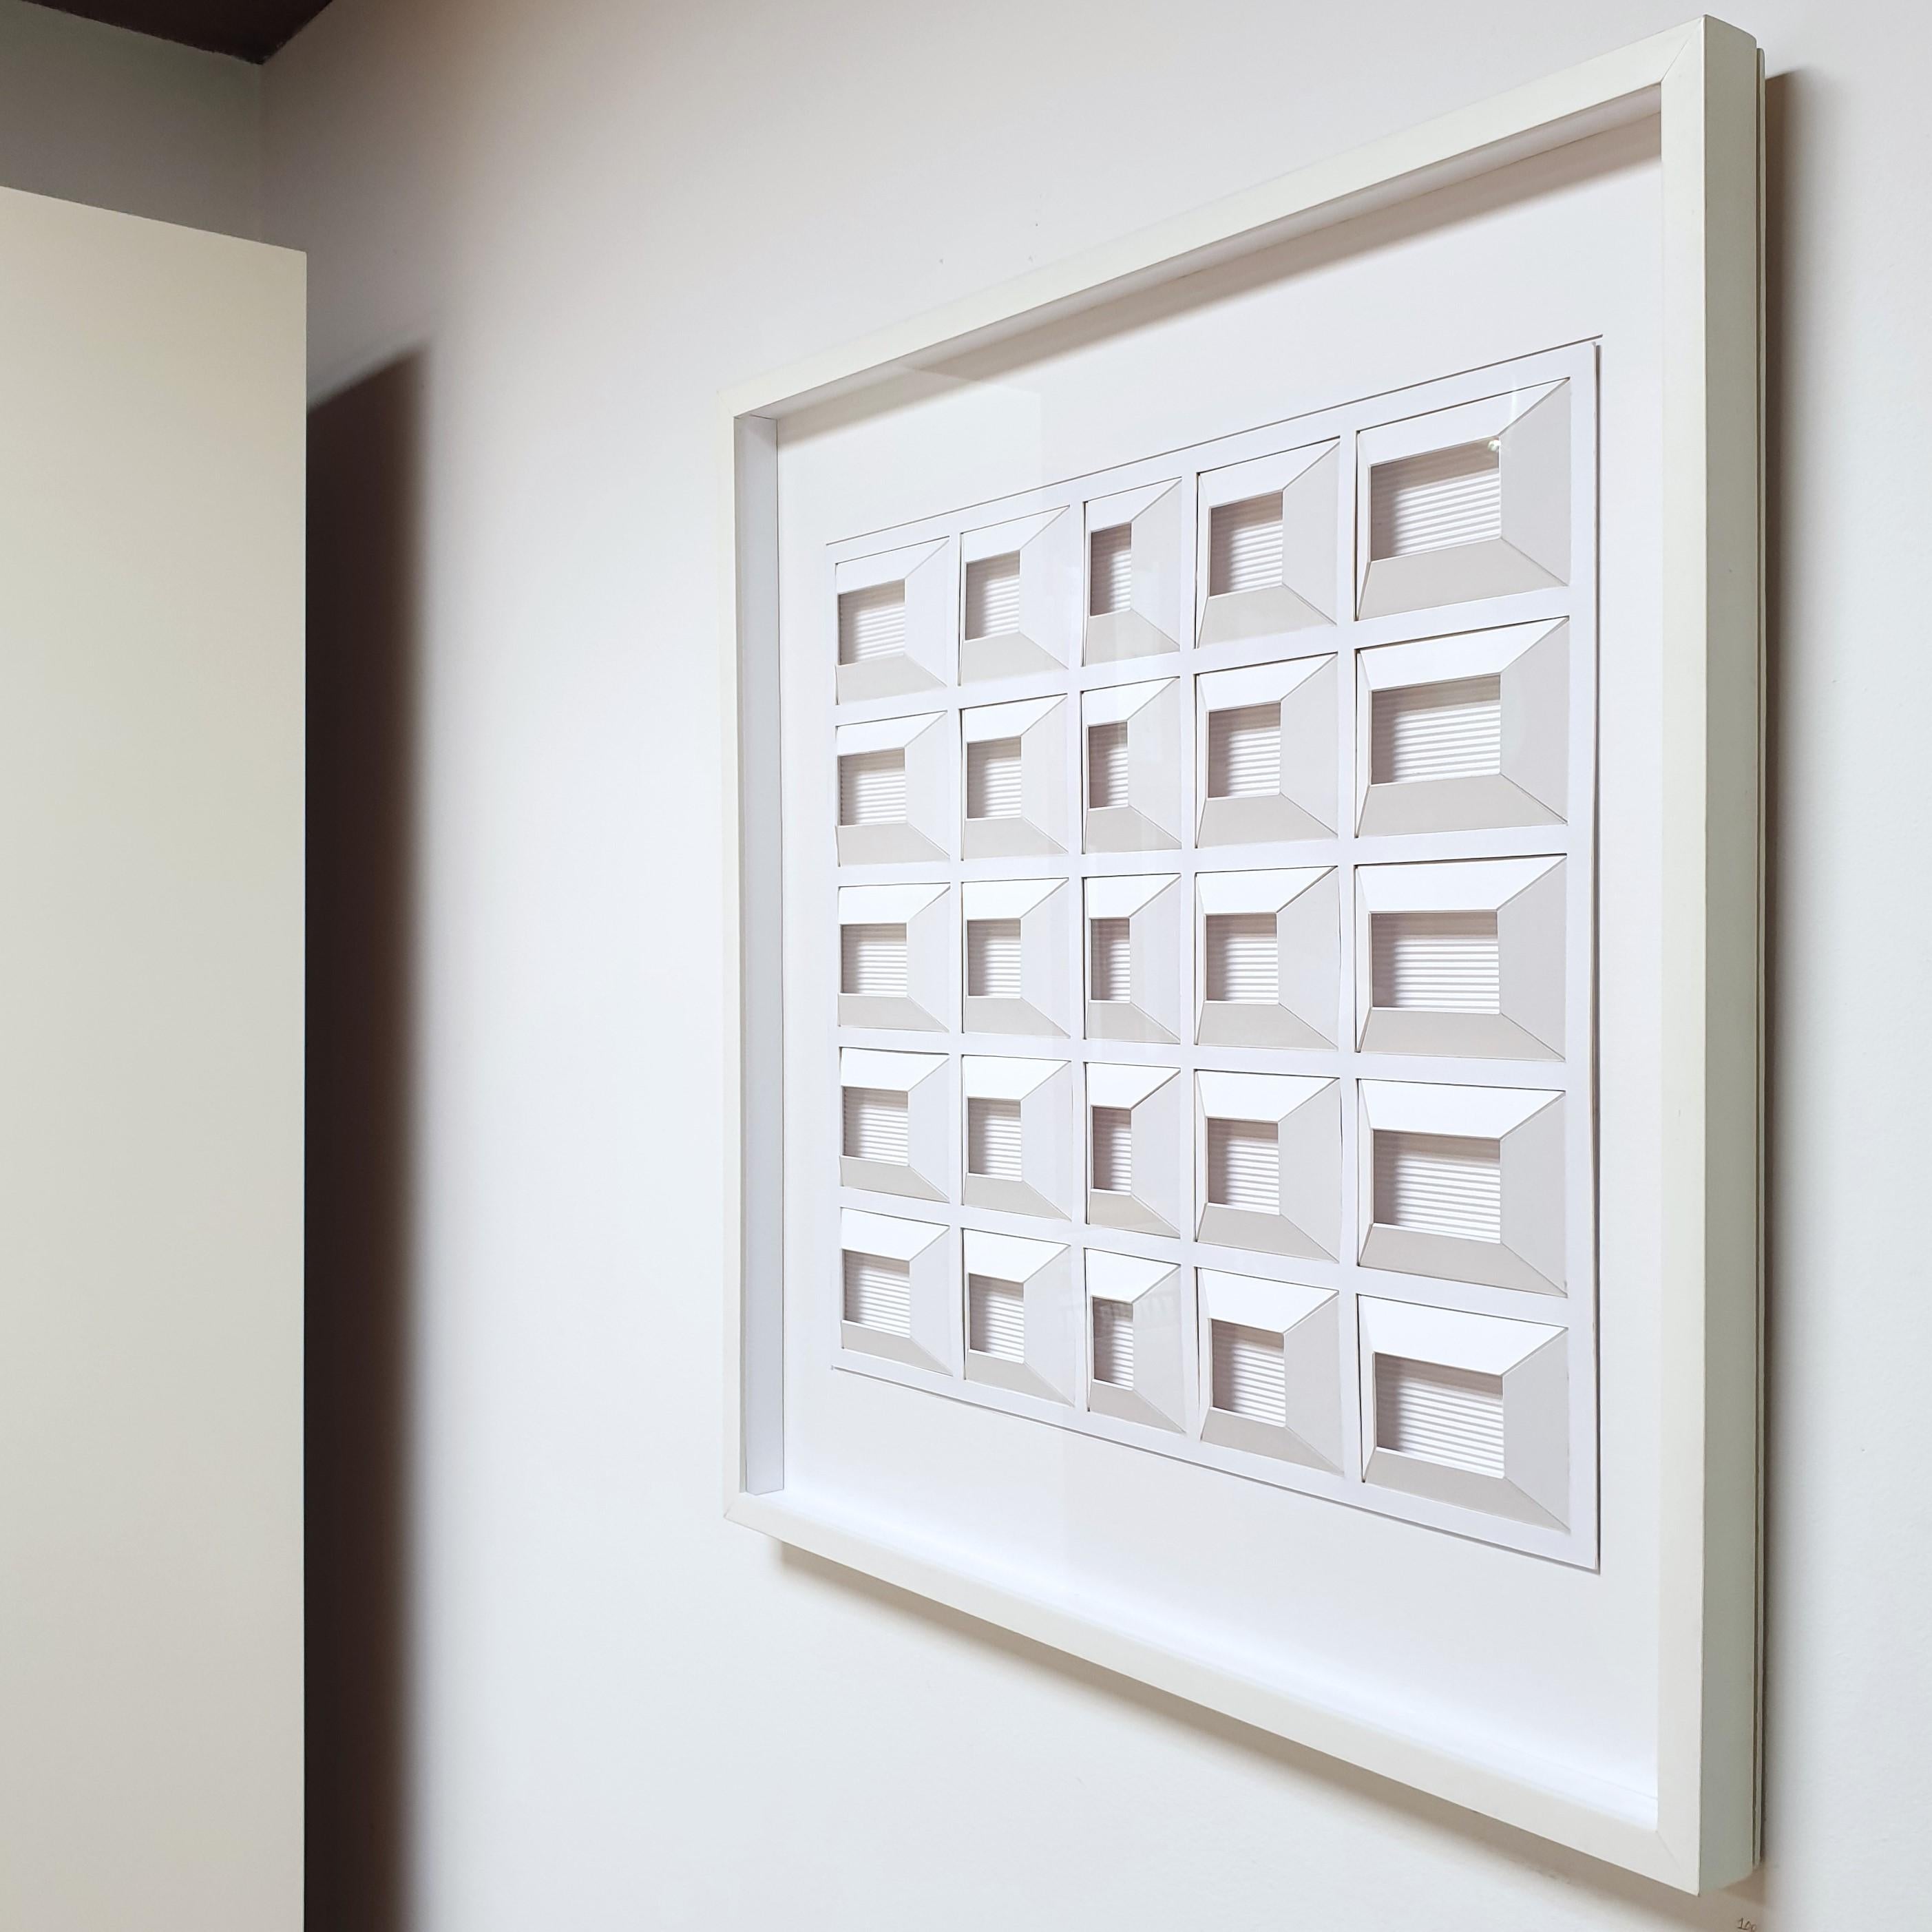 Geometric process white E is a unique one-of-a-kind contemporary modern painting relief by Dutch artist Eef de Graaf. The relief is made from meticulously hand-cut plain white cardboard elements that are hand-mounted together forming twenty-five